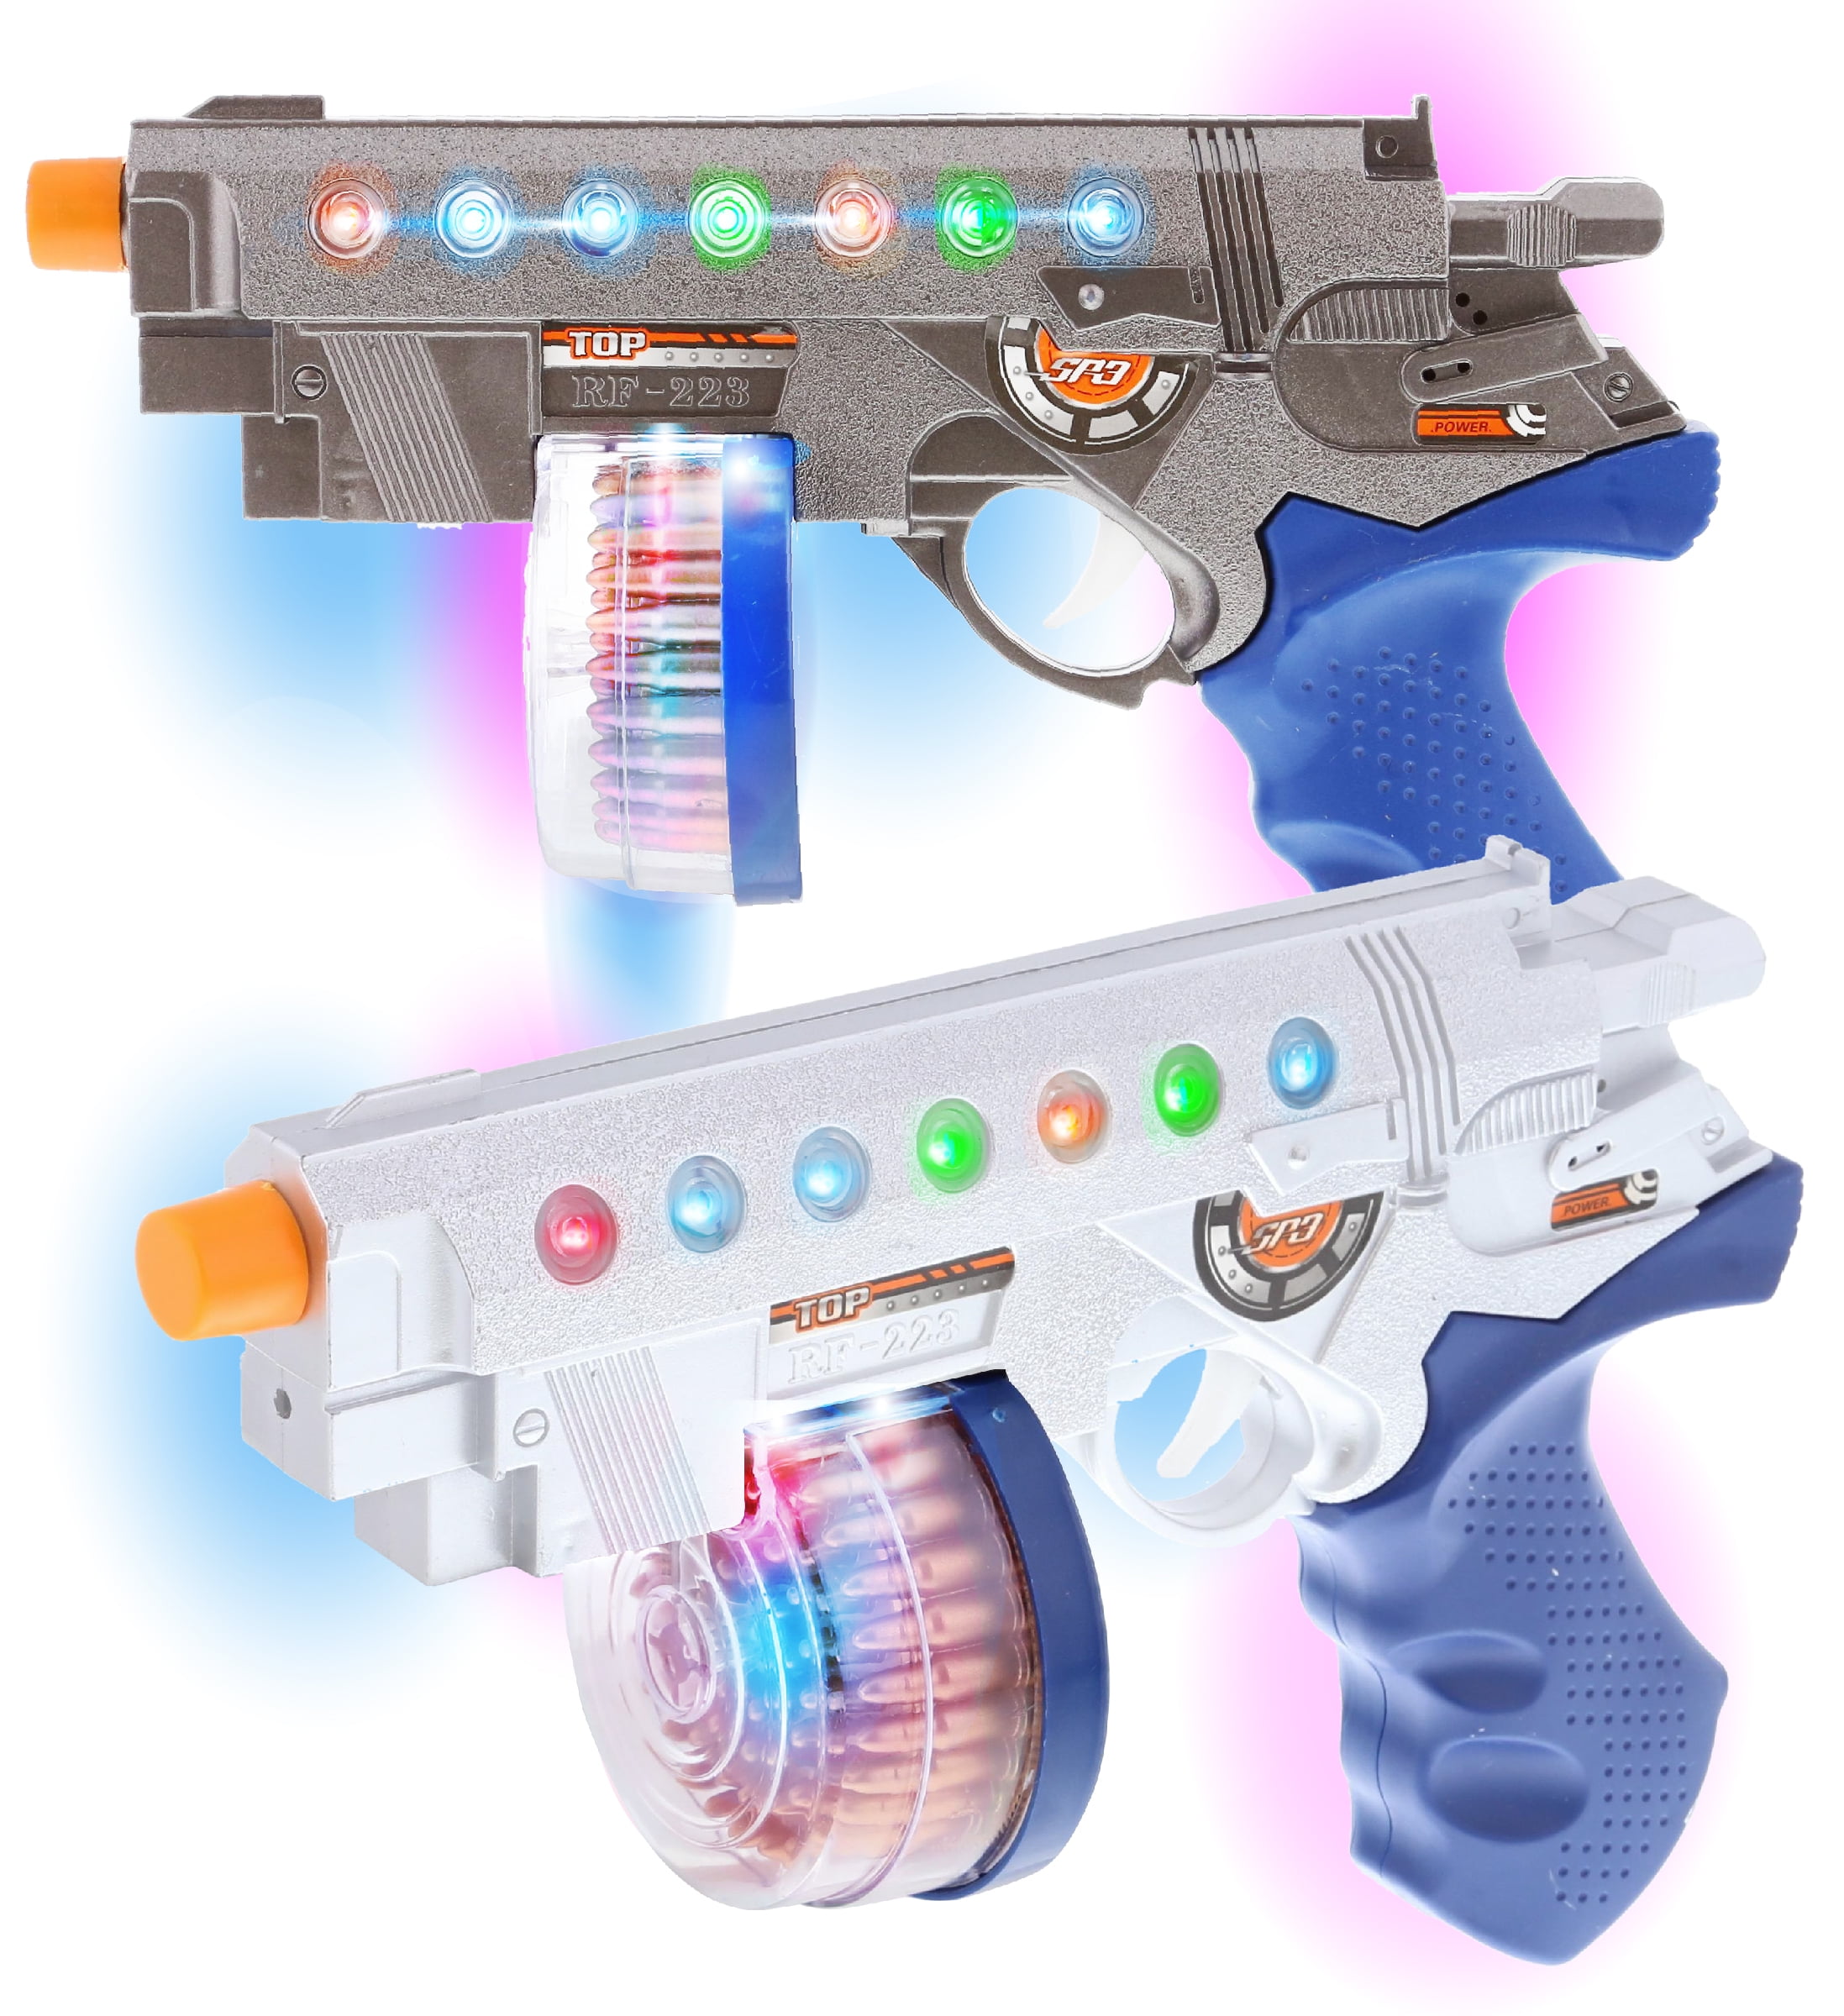 Flashing LED with Sounds Mozlly Light Up Sonic Space Blaster Gun Toy Set of 2 